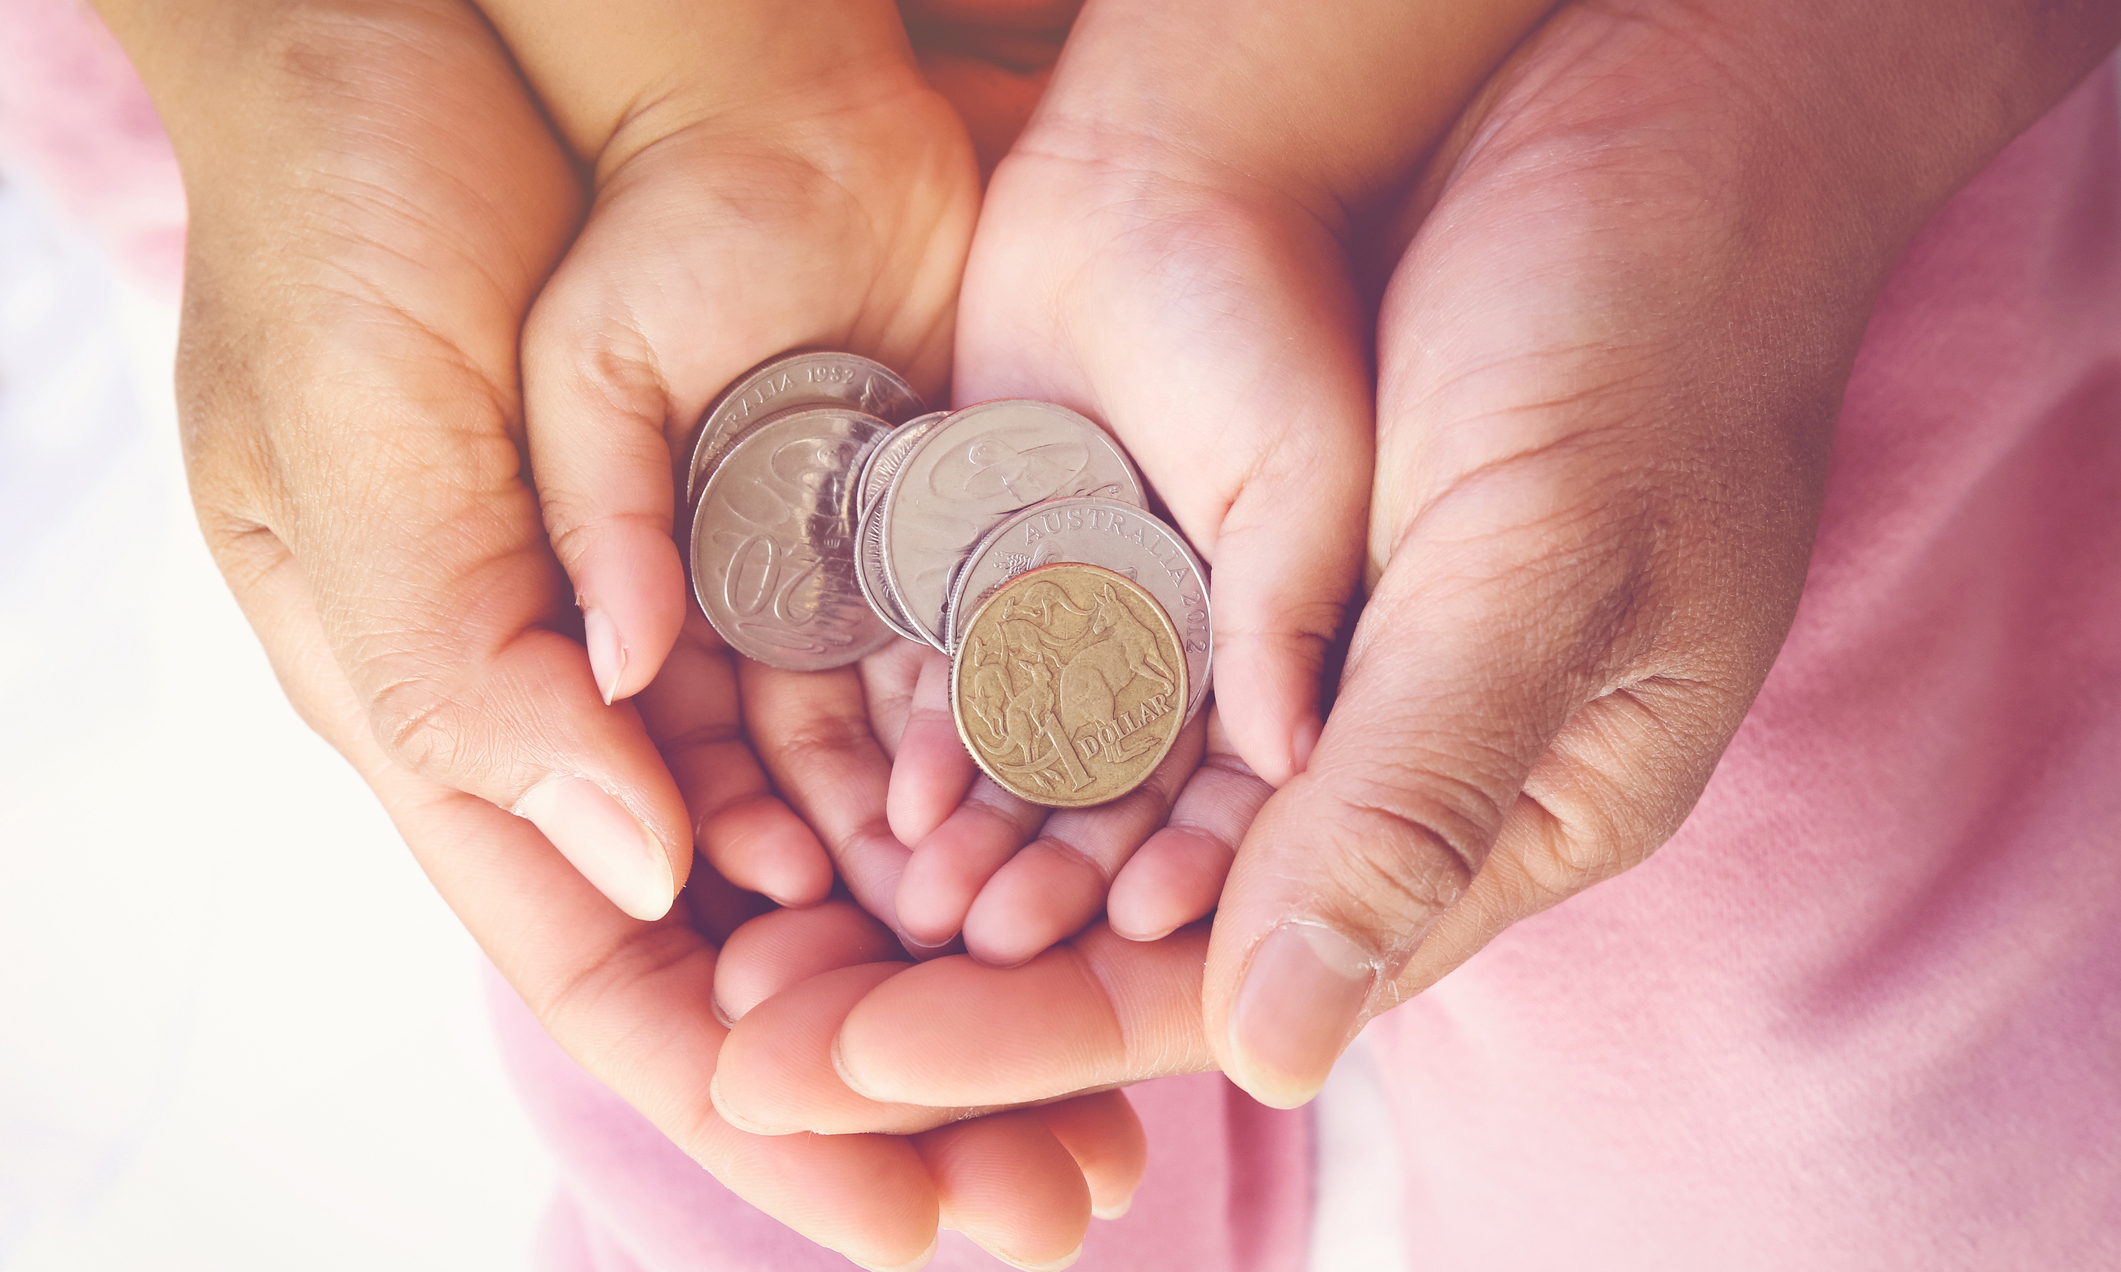 An RMIT report confirmed actively saving is one of the most important influences on financial wellbeing.